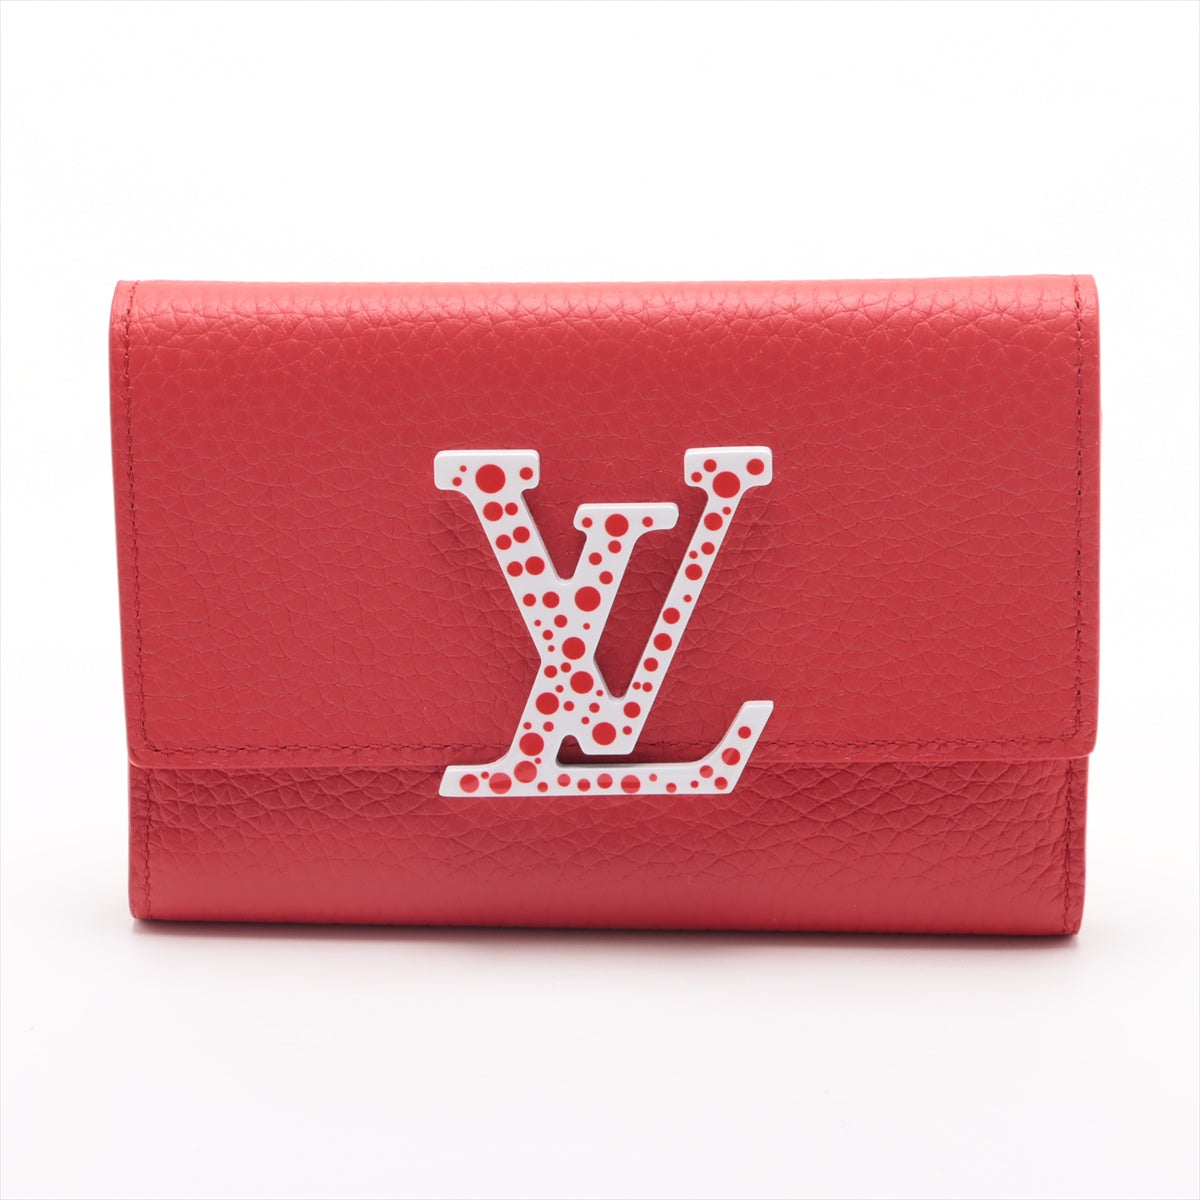 Louis Vuitton x Yayoi Kusama Infinity dots Portefeuille Capucine compacts M82113 Compact Wallet Red Maxi